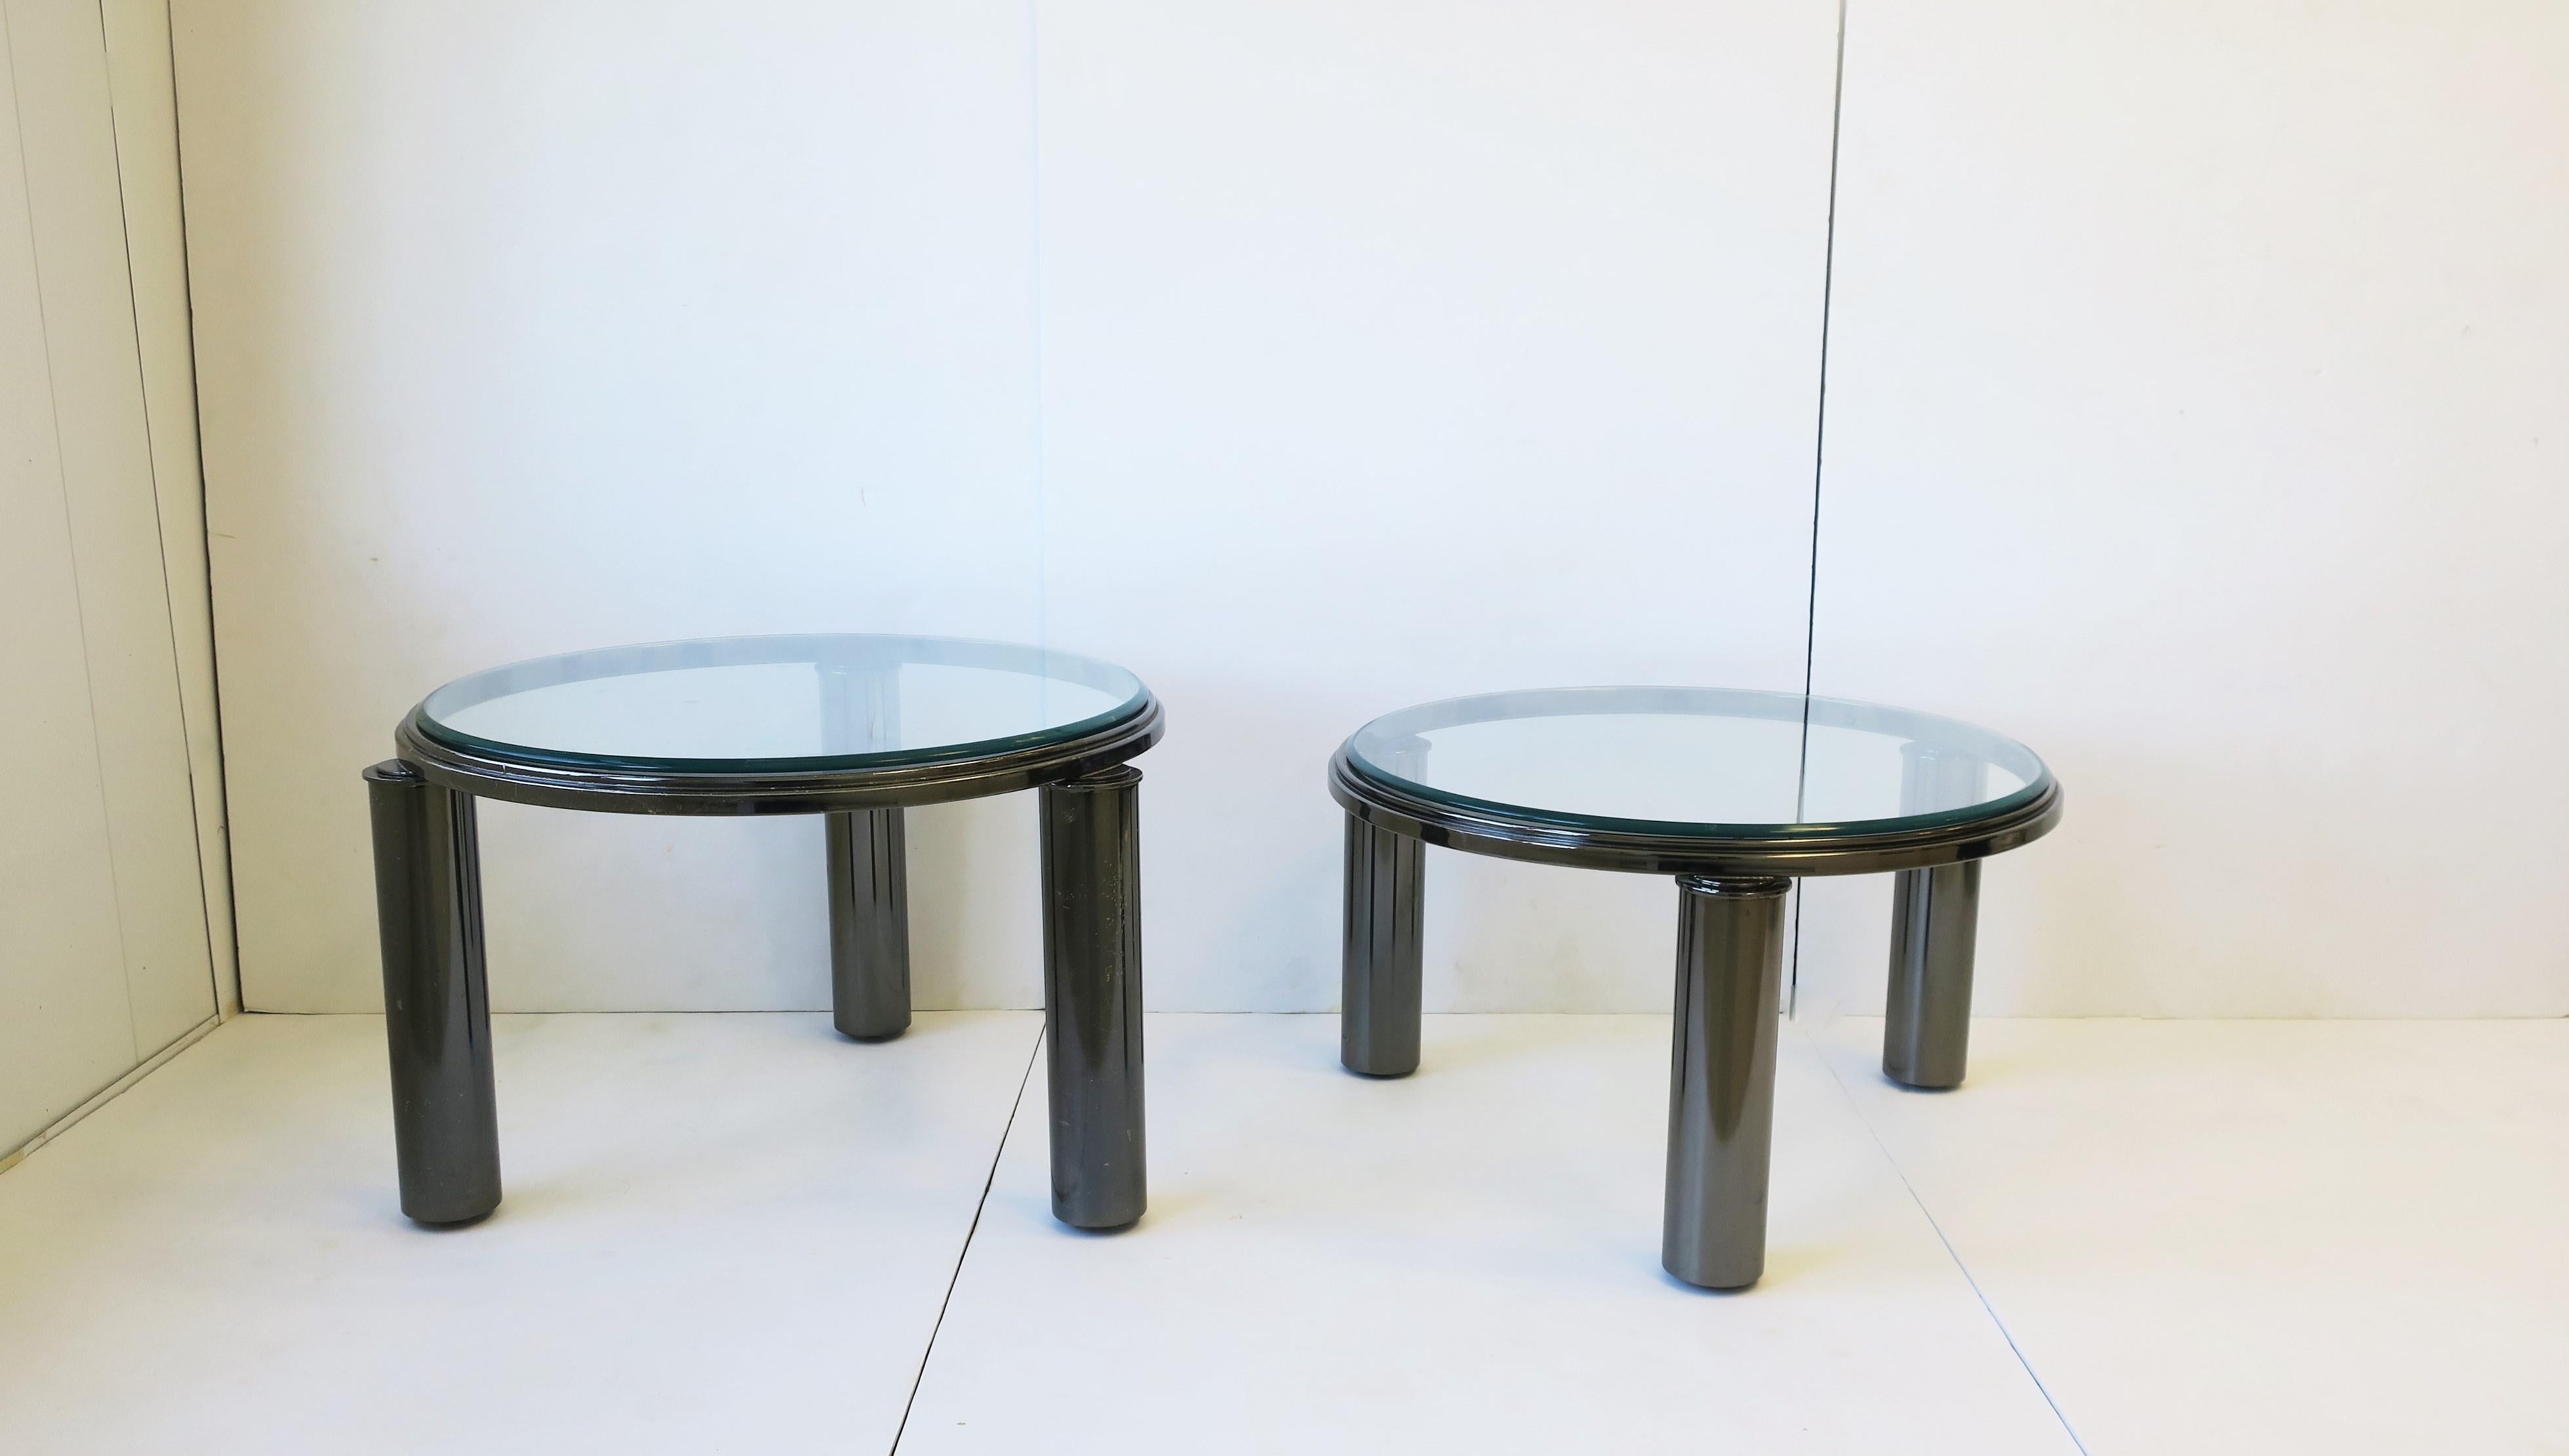 A set of two (2) designer 1990s Post-Modern 'smoked' gray-charcoal chrome round bi-level cocktail/coffee tables with cylindrical legs and beveled clear glass tops. Designed by the Design Institute of America (DIA), 1995. Smoked chrome has a dark